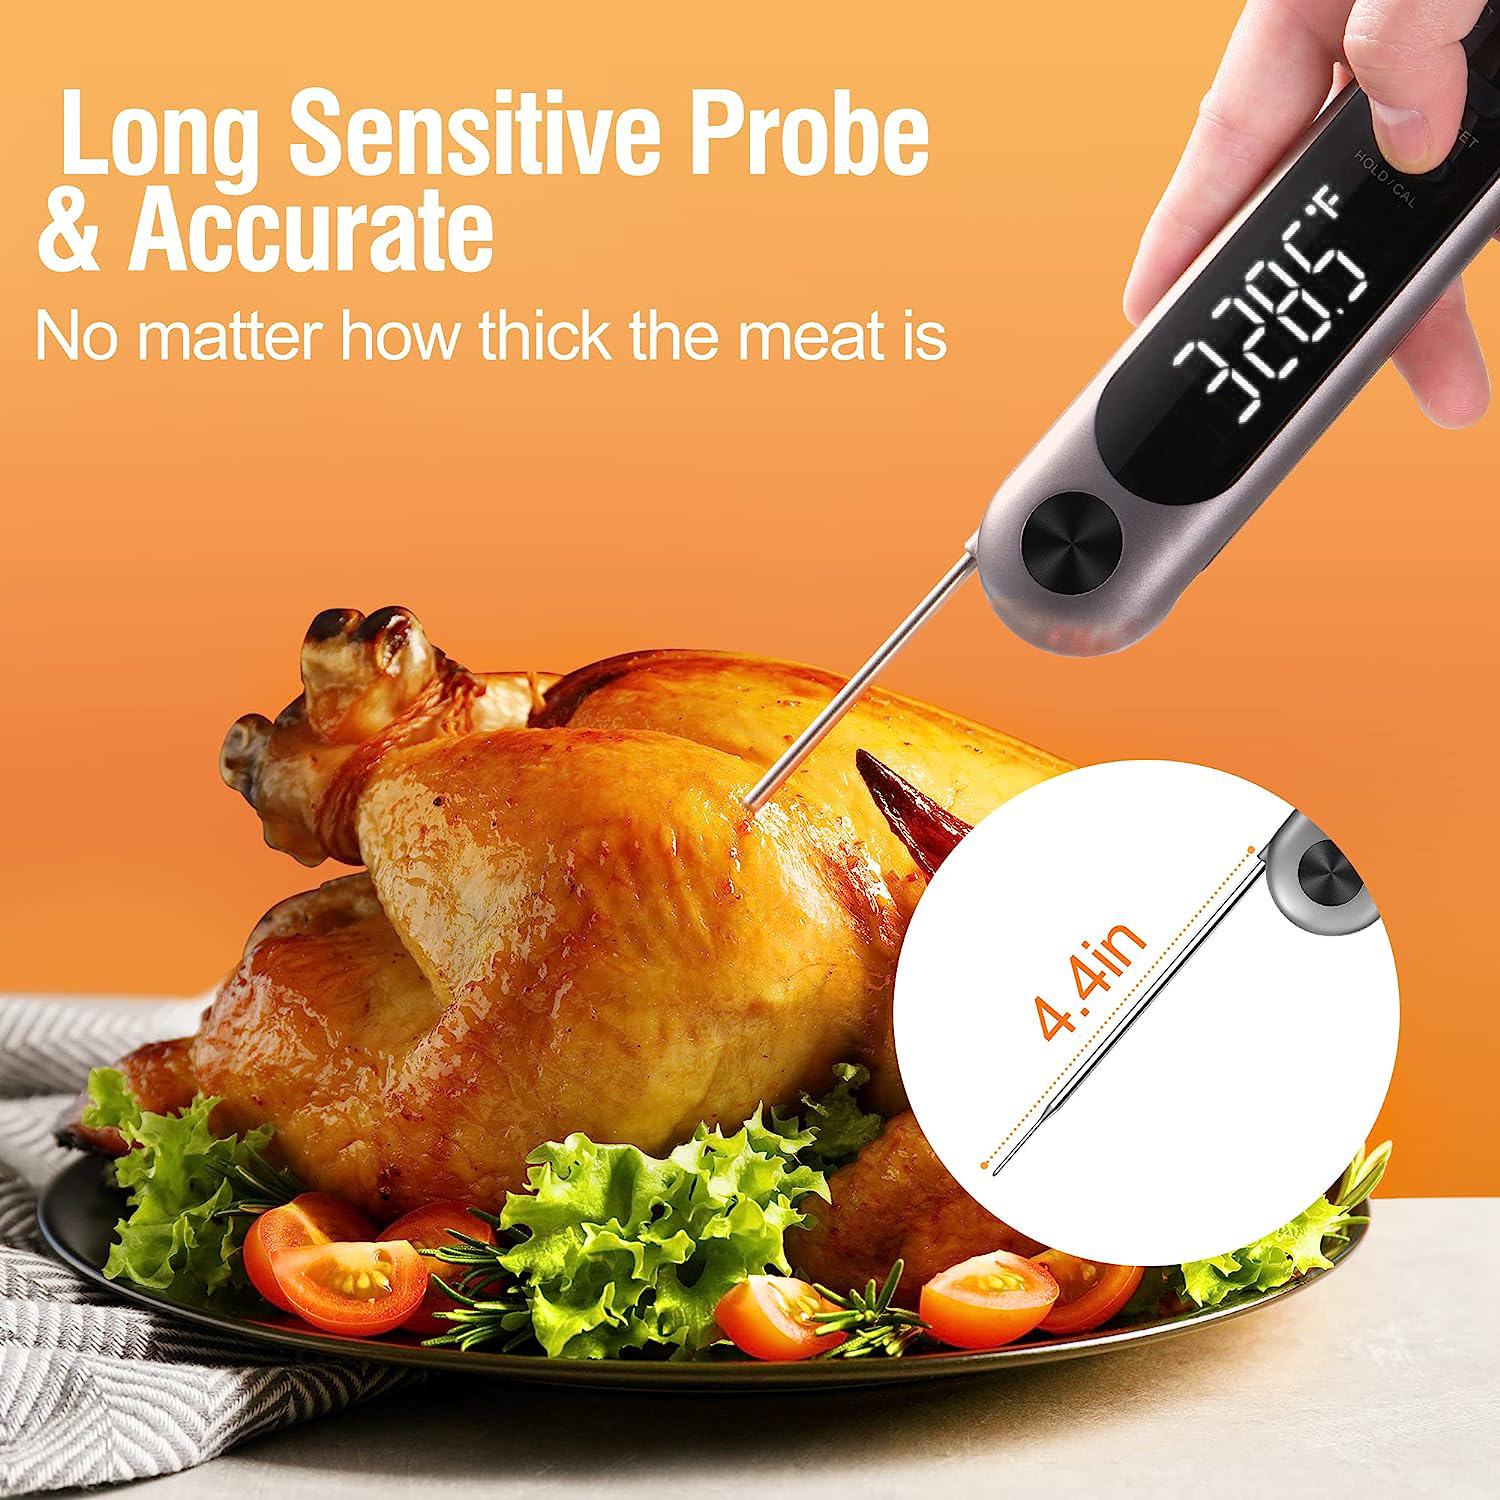 Do You know Optimal Placement where to put thermometer probe in turkey?